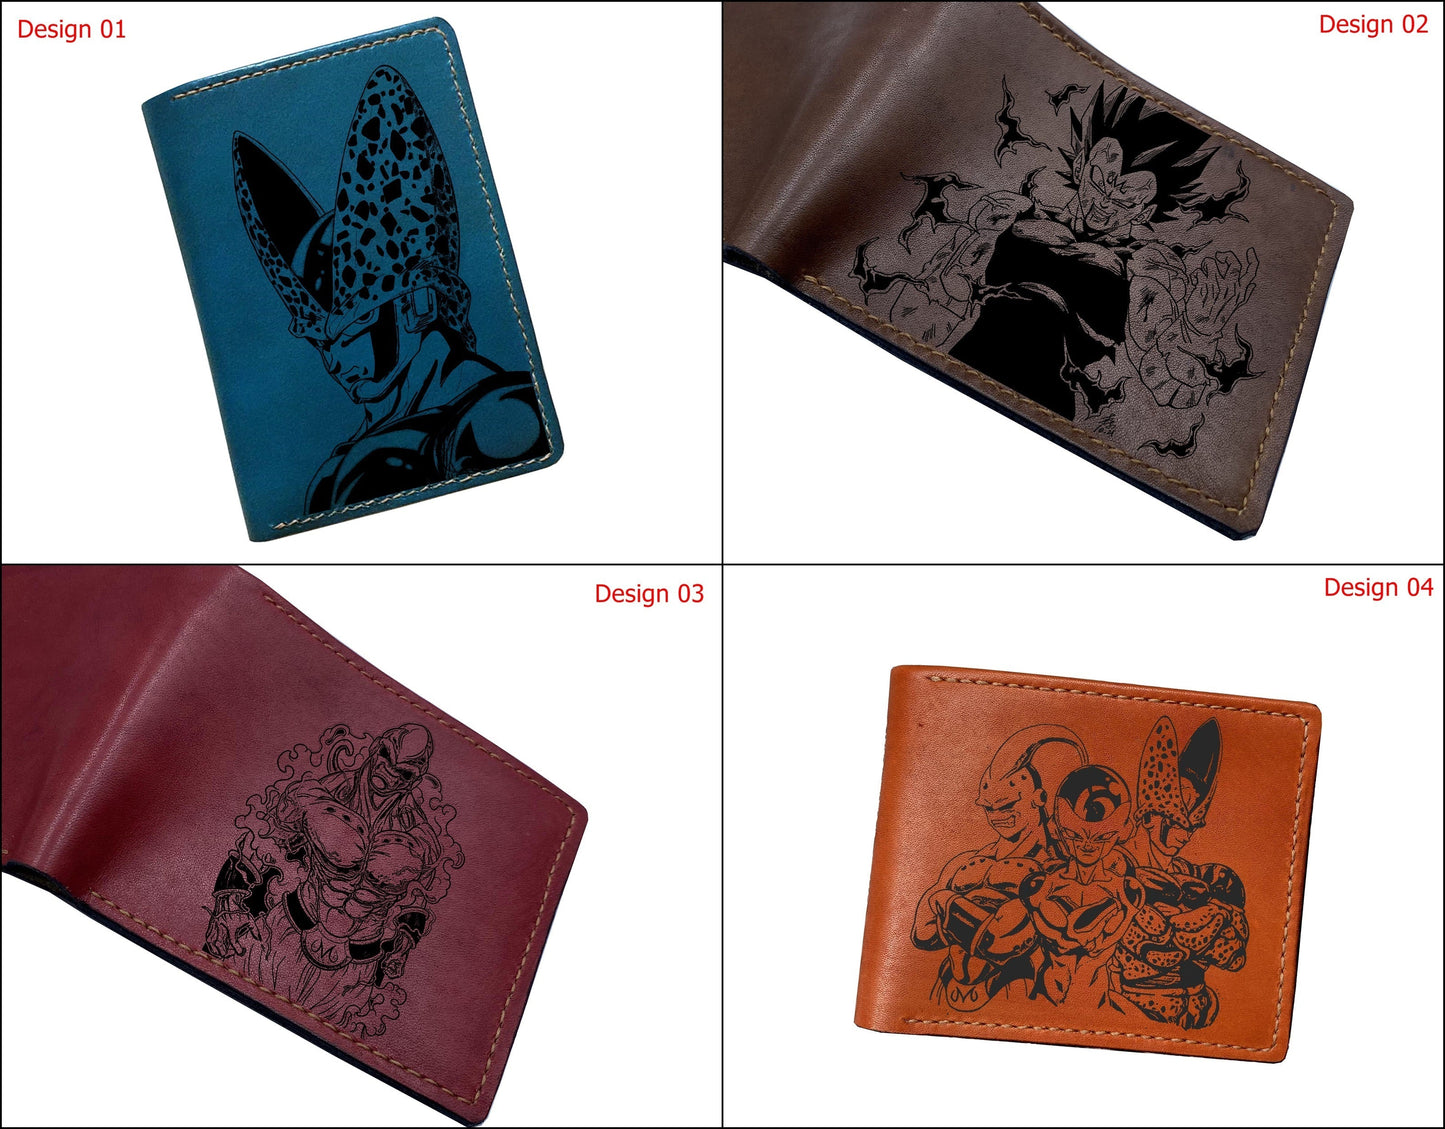 Mayan Corner - Dragon ball characters drawing leather wallet, fan art leather gift for men, wallet for him, leather anniversary present ideas -  Freiza super villains